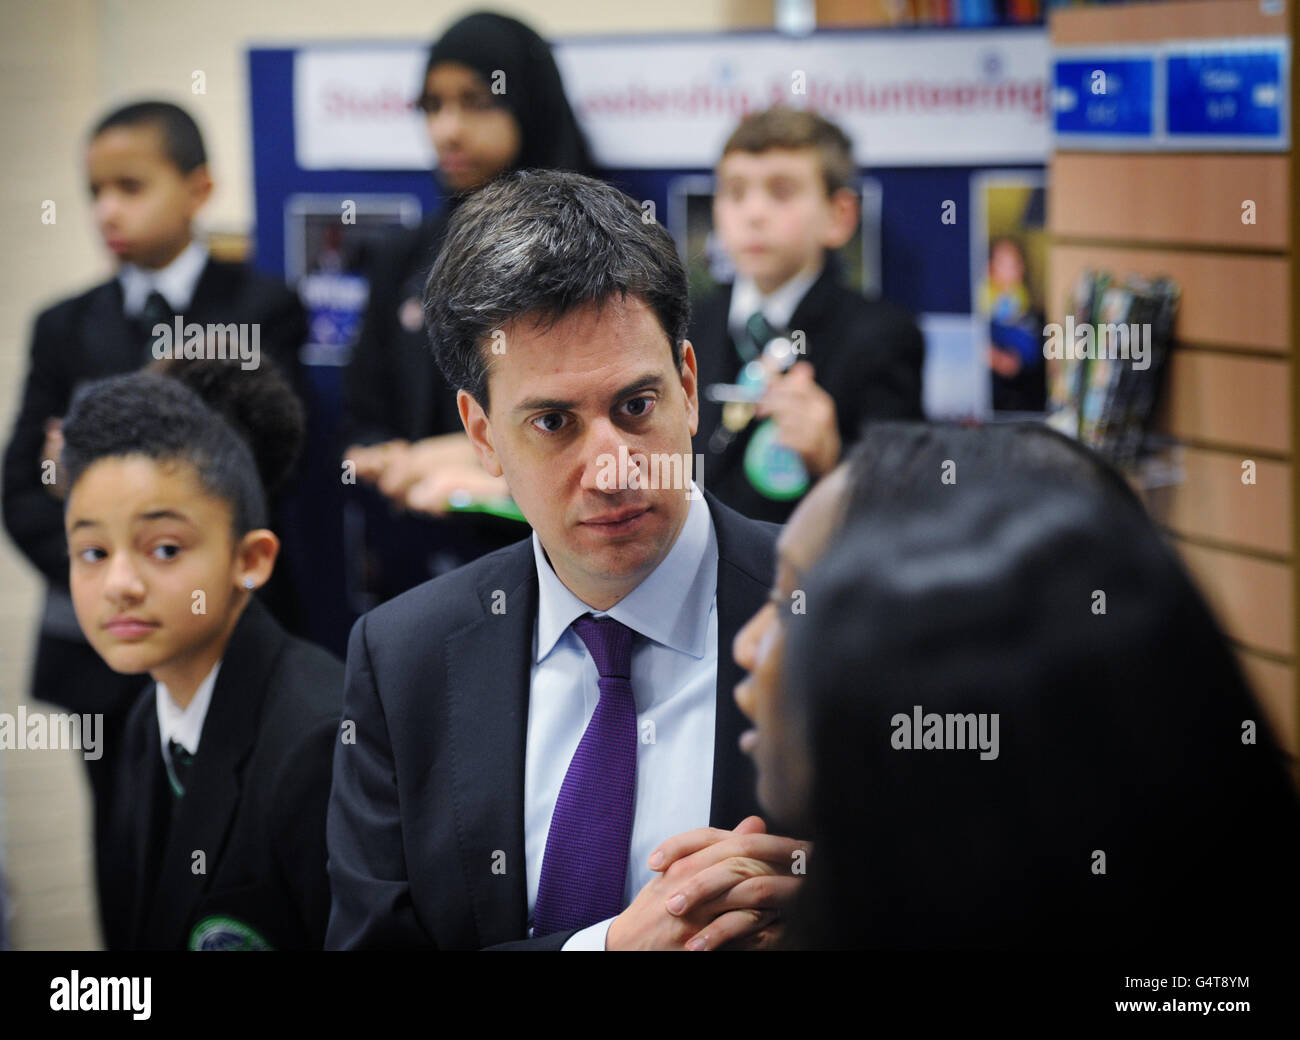 Labour leader Ed Miliband meets pupils at Bethnal Green Academy in east London before delivering a speech on the economy. Stock Photo